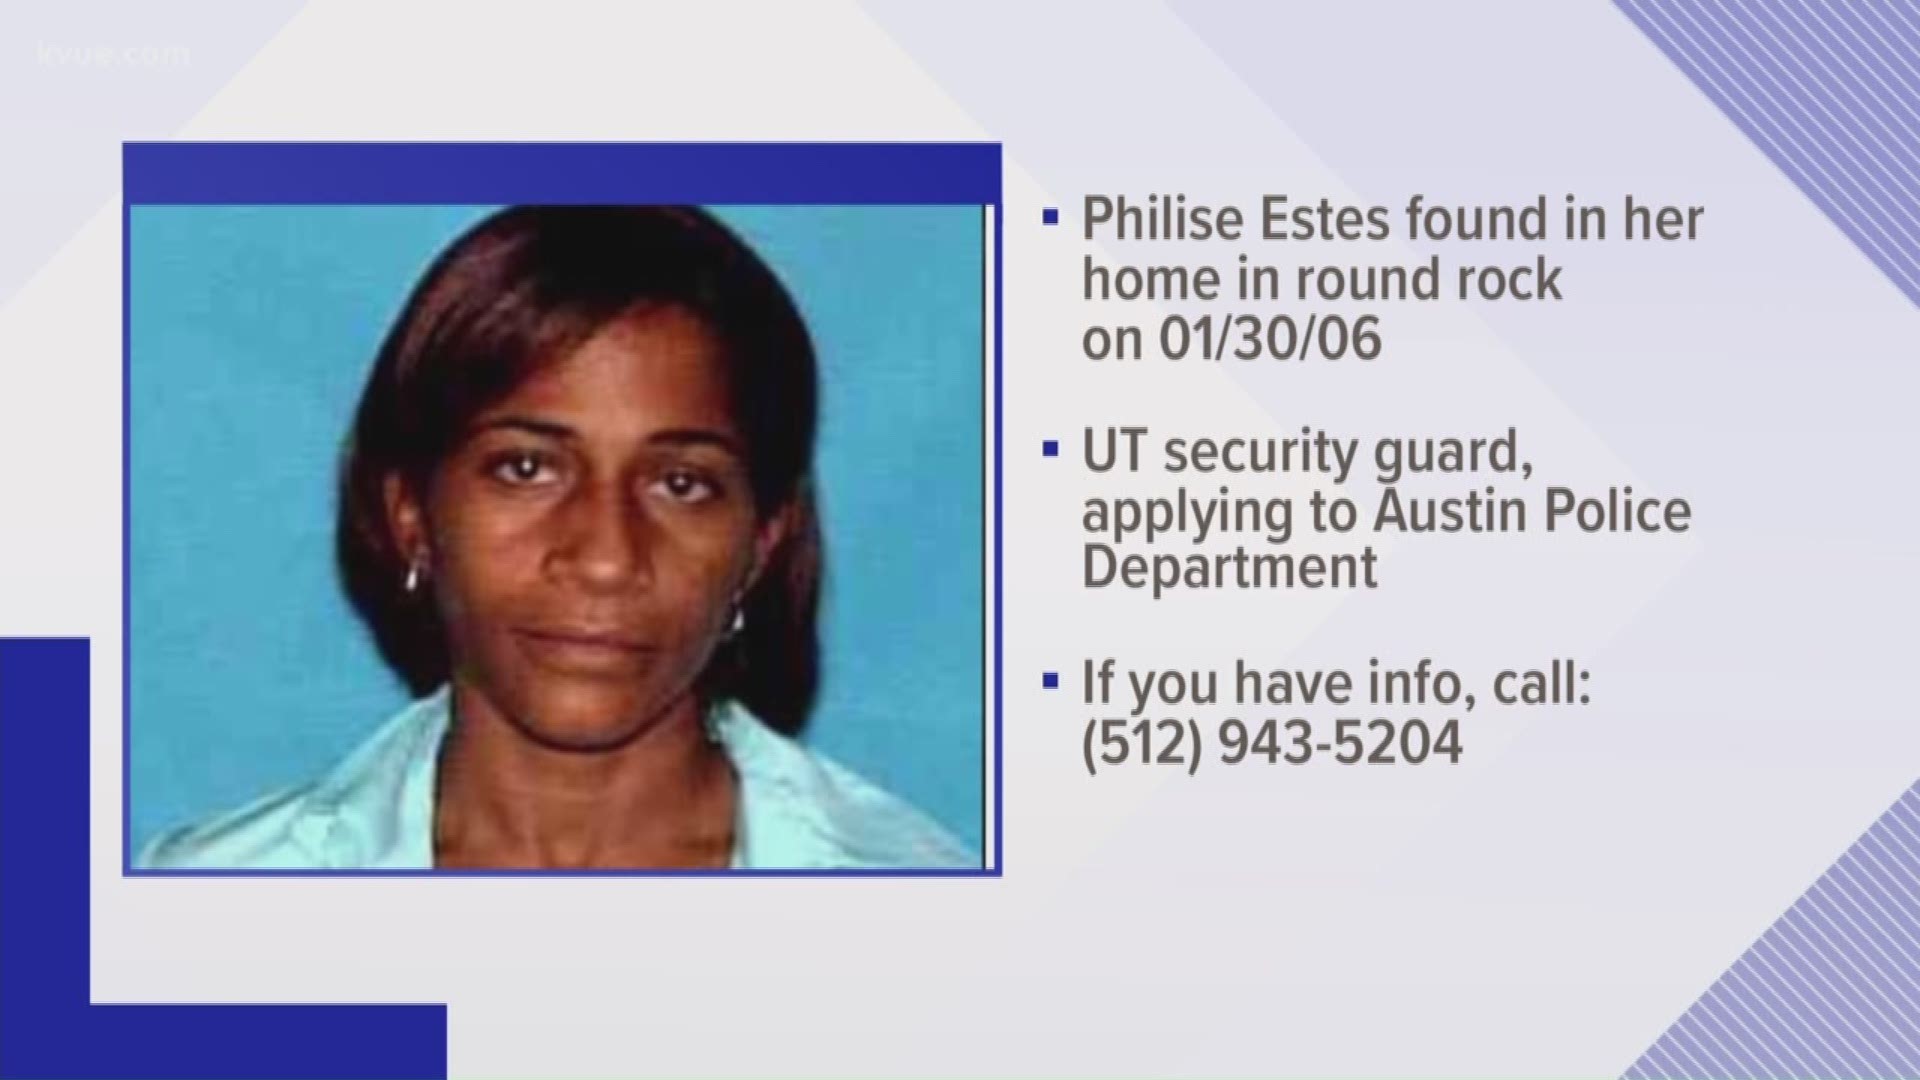 Philise Estes was found dead in her Round Rock home on Jan. 30, 2006. She was a security guard for the University of Texas, and was trying to become an Austin police officer.